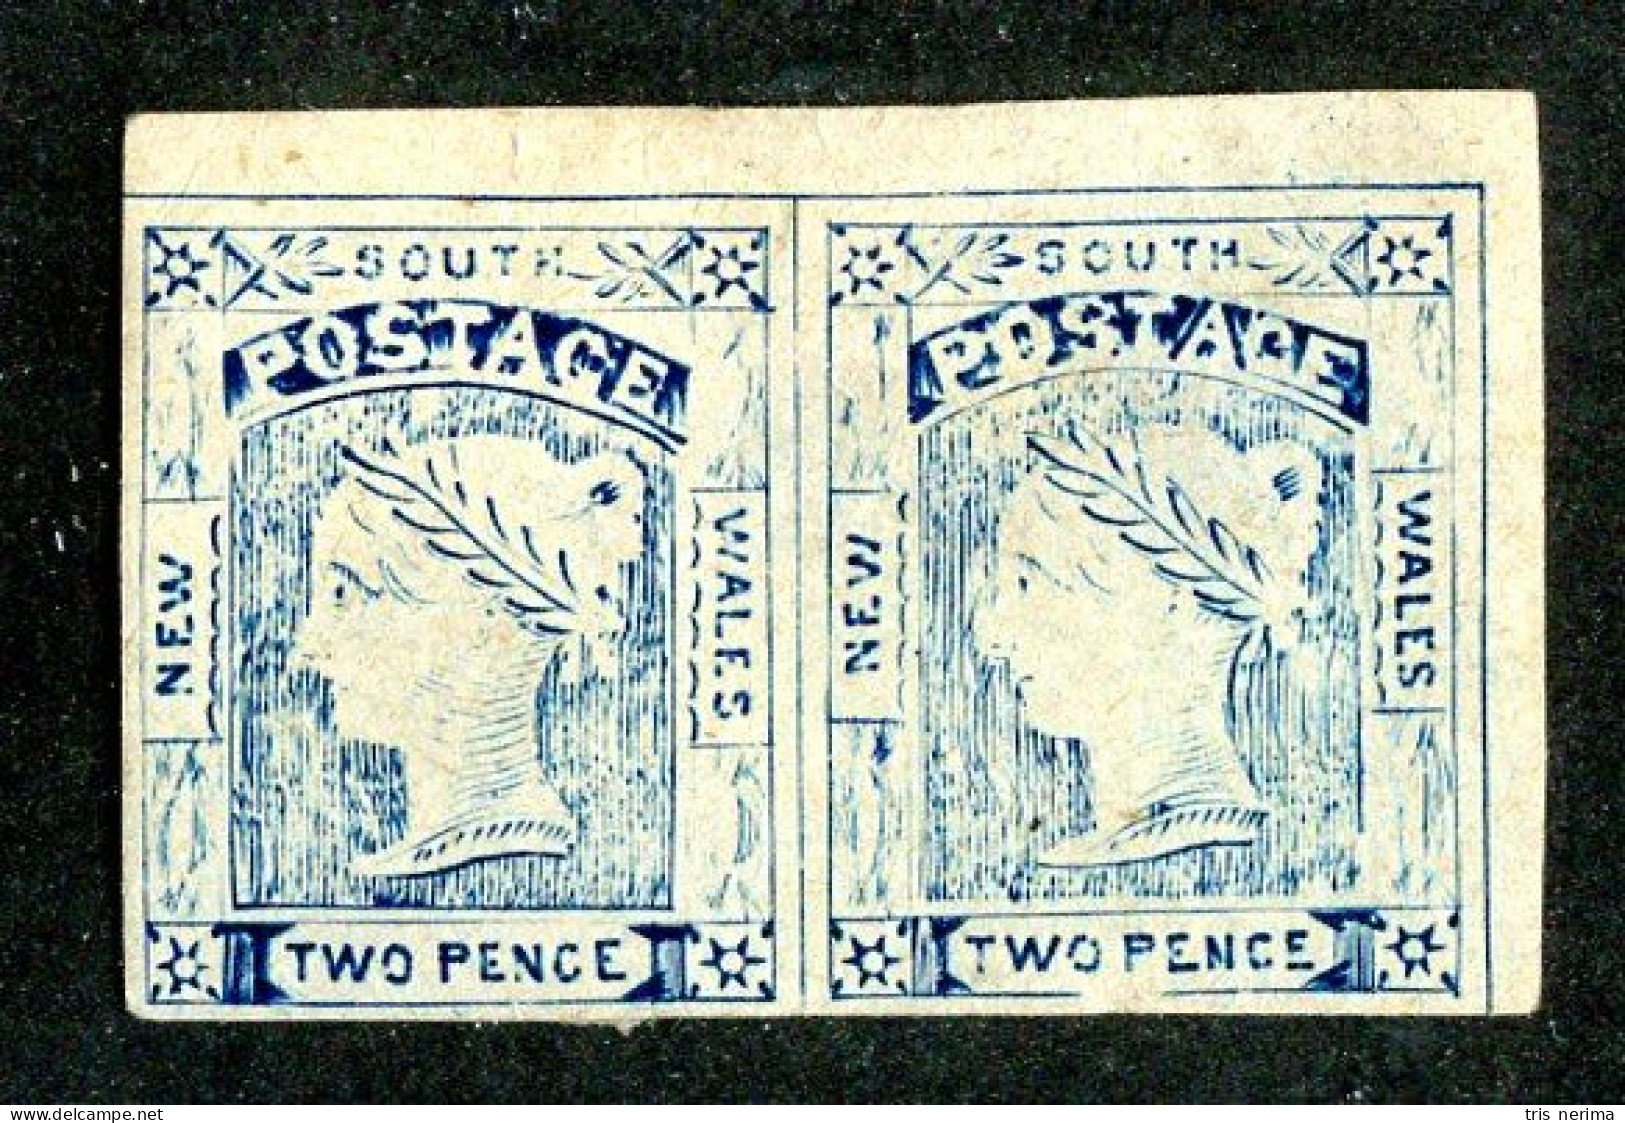 7936 BCX 1852 NSW Scott # 15 Forgery (offers Welcome) - Mint Stamps